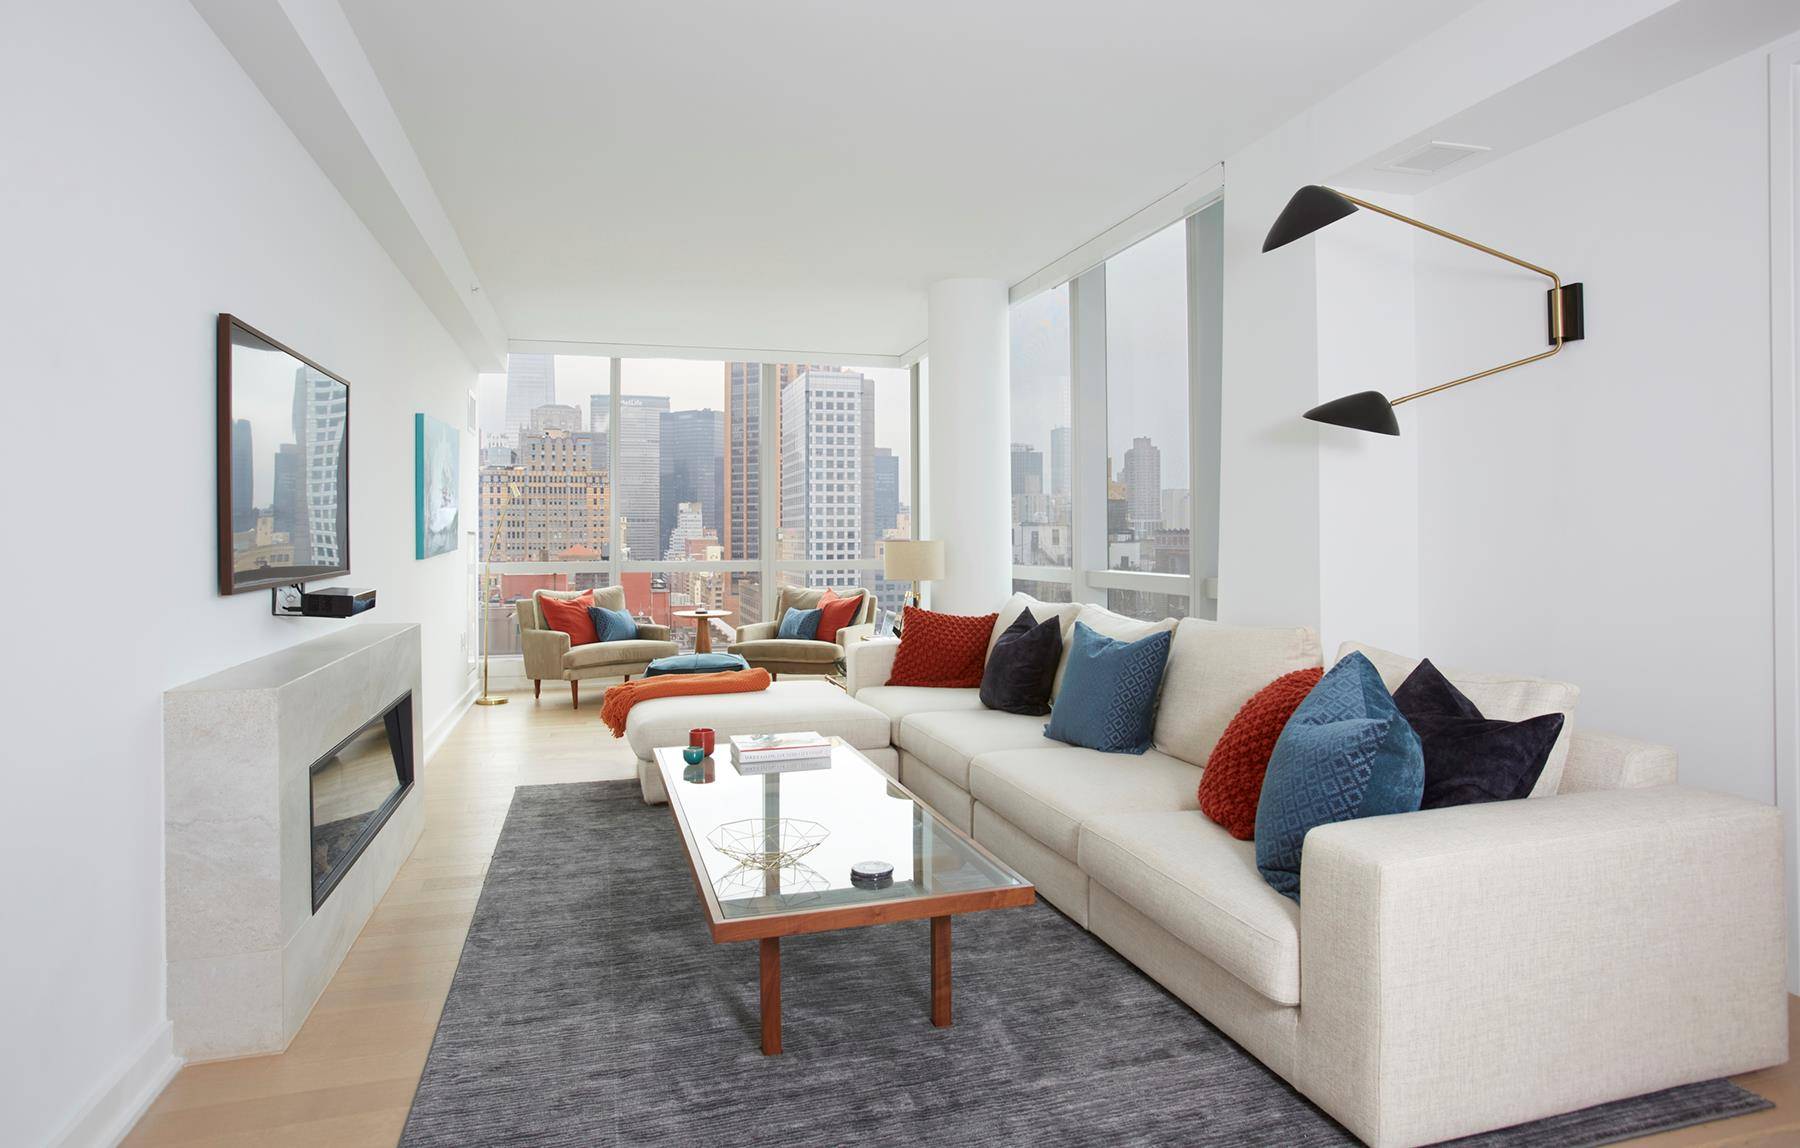 Stunning skyline views from a corner three bedroom furnished residence in 400 Park Ave South.